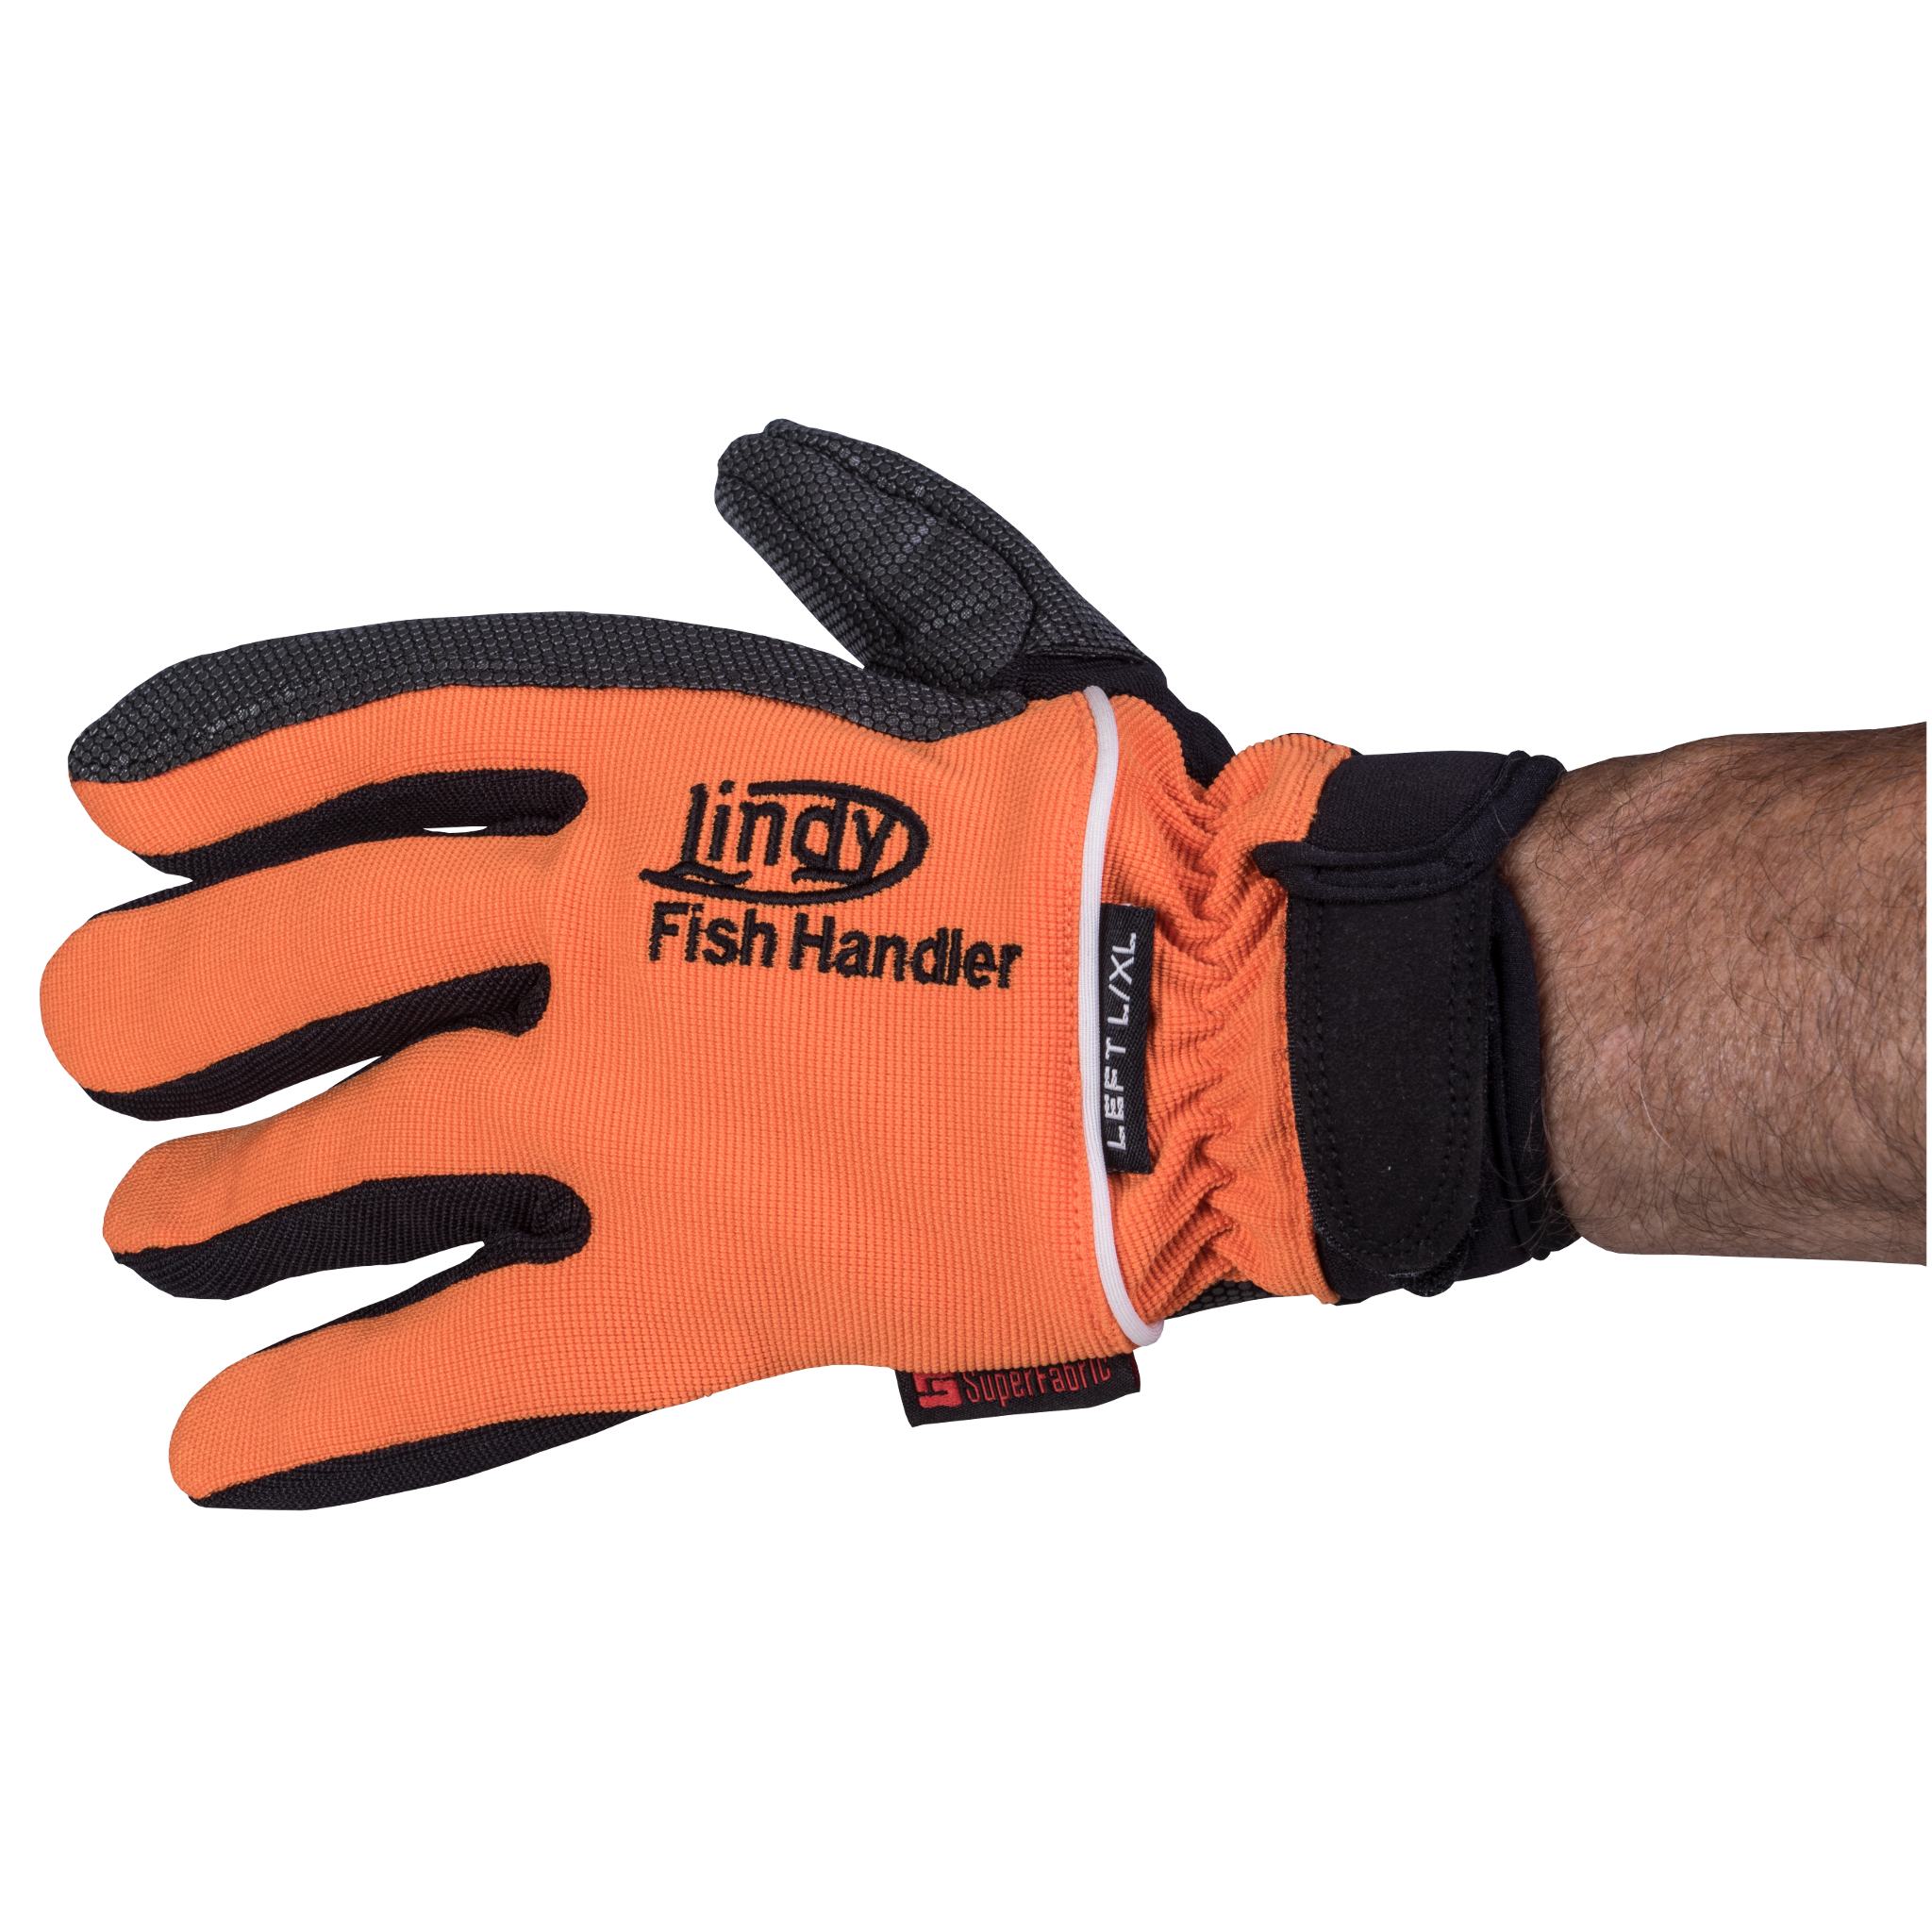 https://mcproductimages.s3-us-west-2.amazonaws.com/lindy/lindy-%20Fish-Handling-Glove-Orange/AC950.png